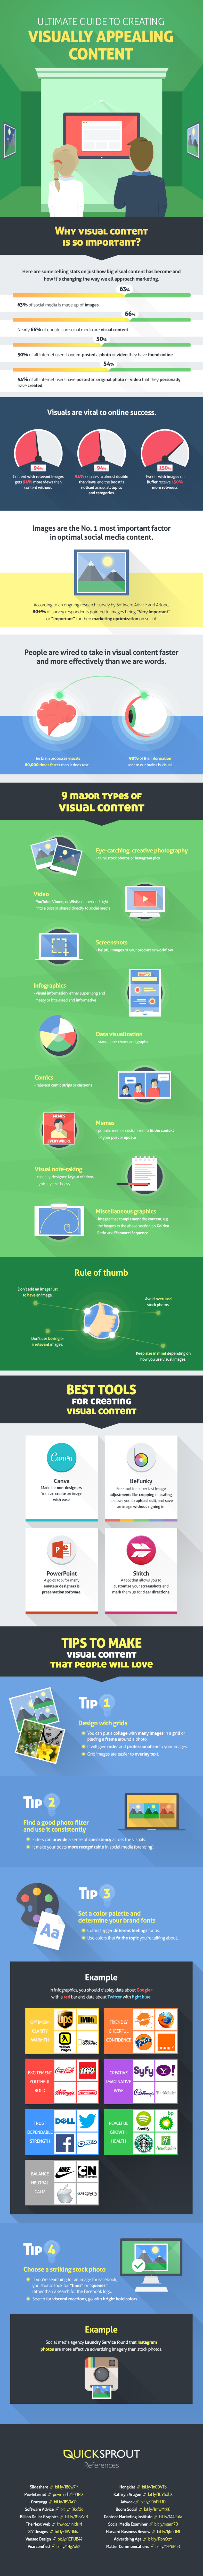 Infographic - The Ultimate Guide to Creating Visually Appealing Content. Source - Quick Sprout.